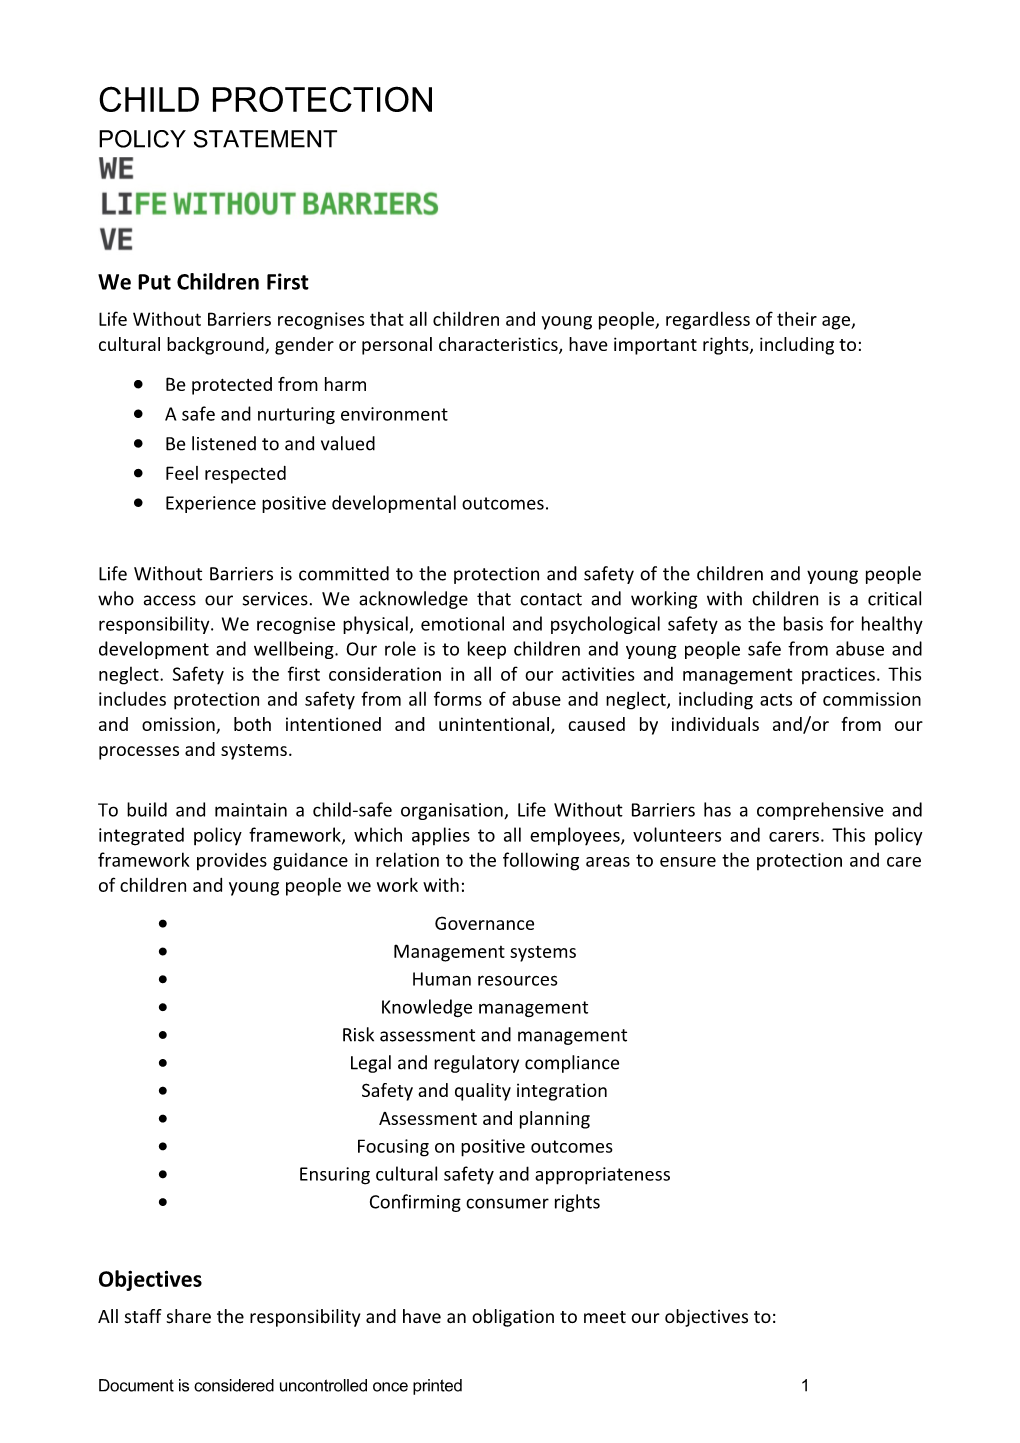 2.4A Child Protection Policy Statement